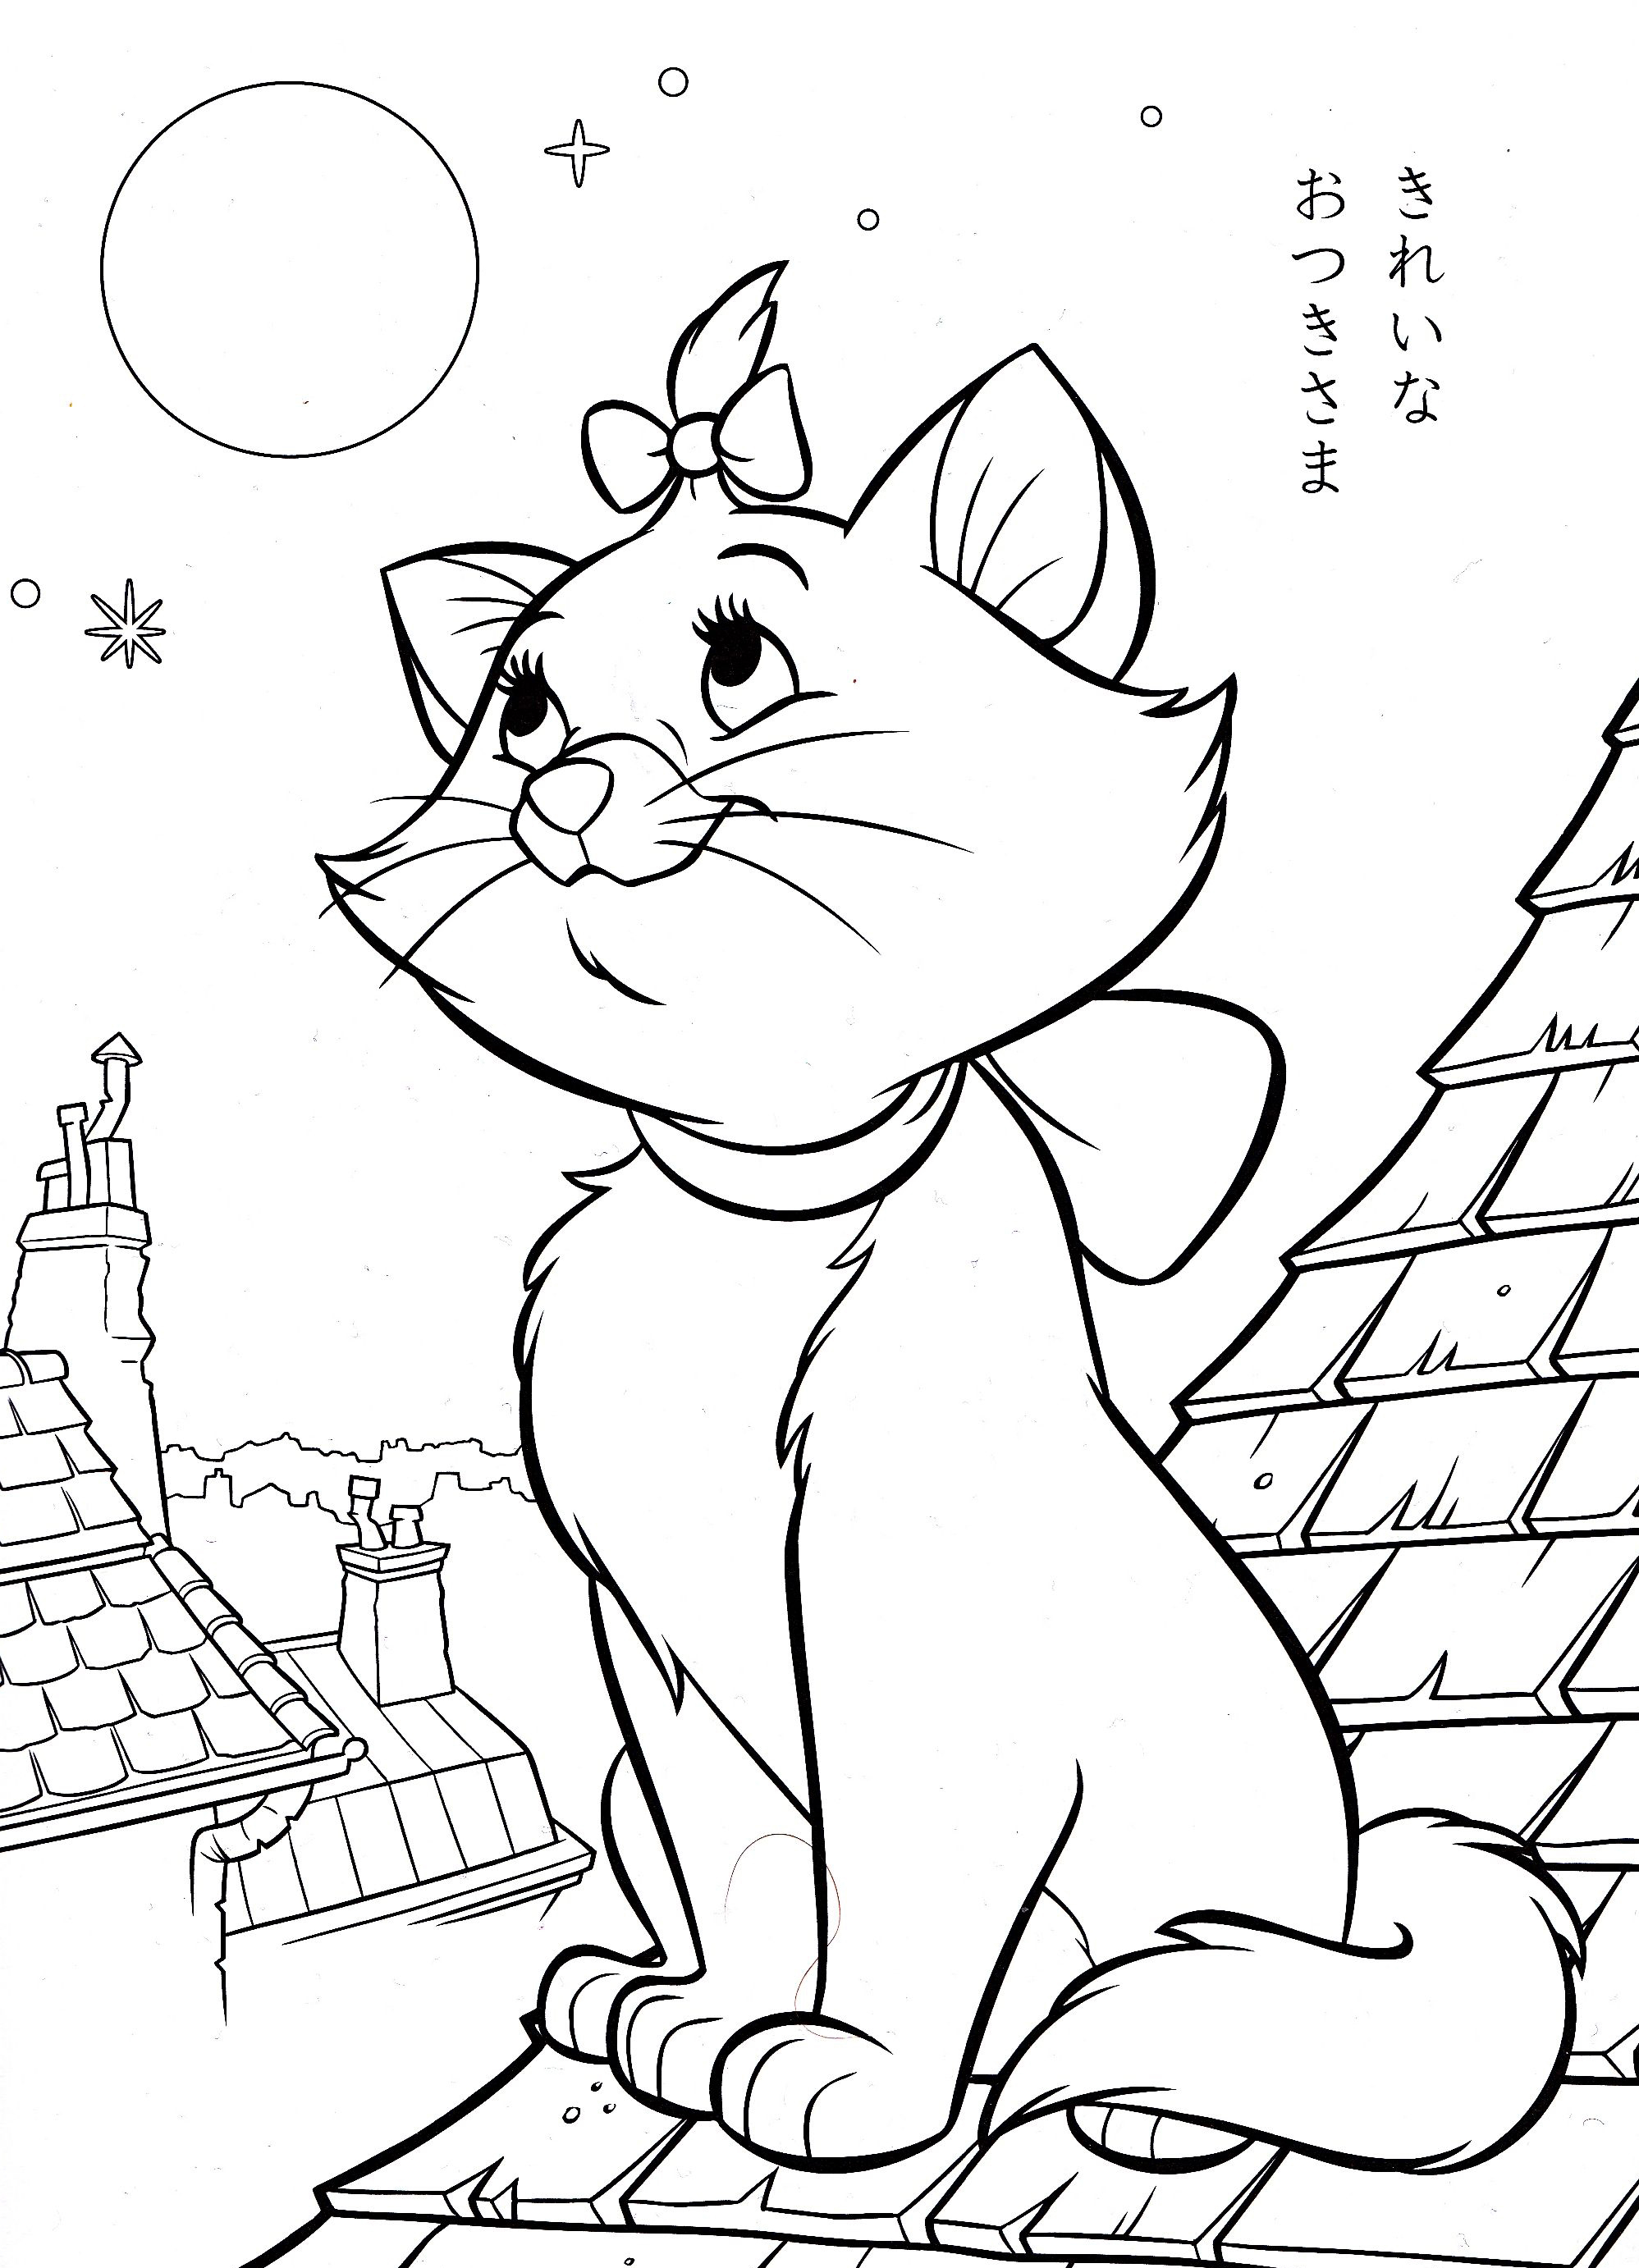 Coloring-Pages-For-All-Ages
